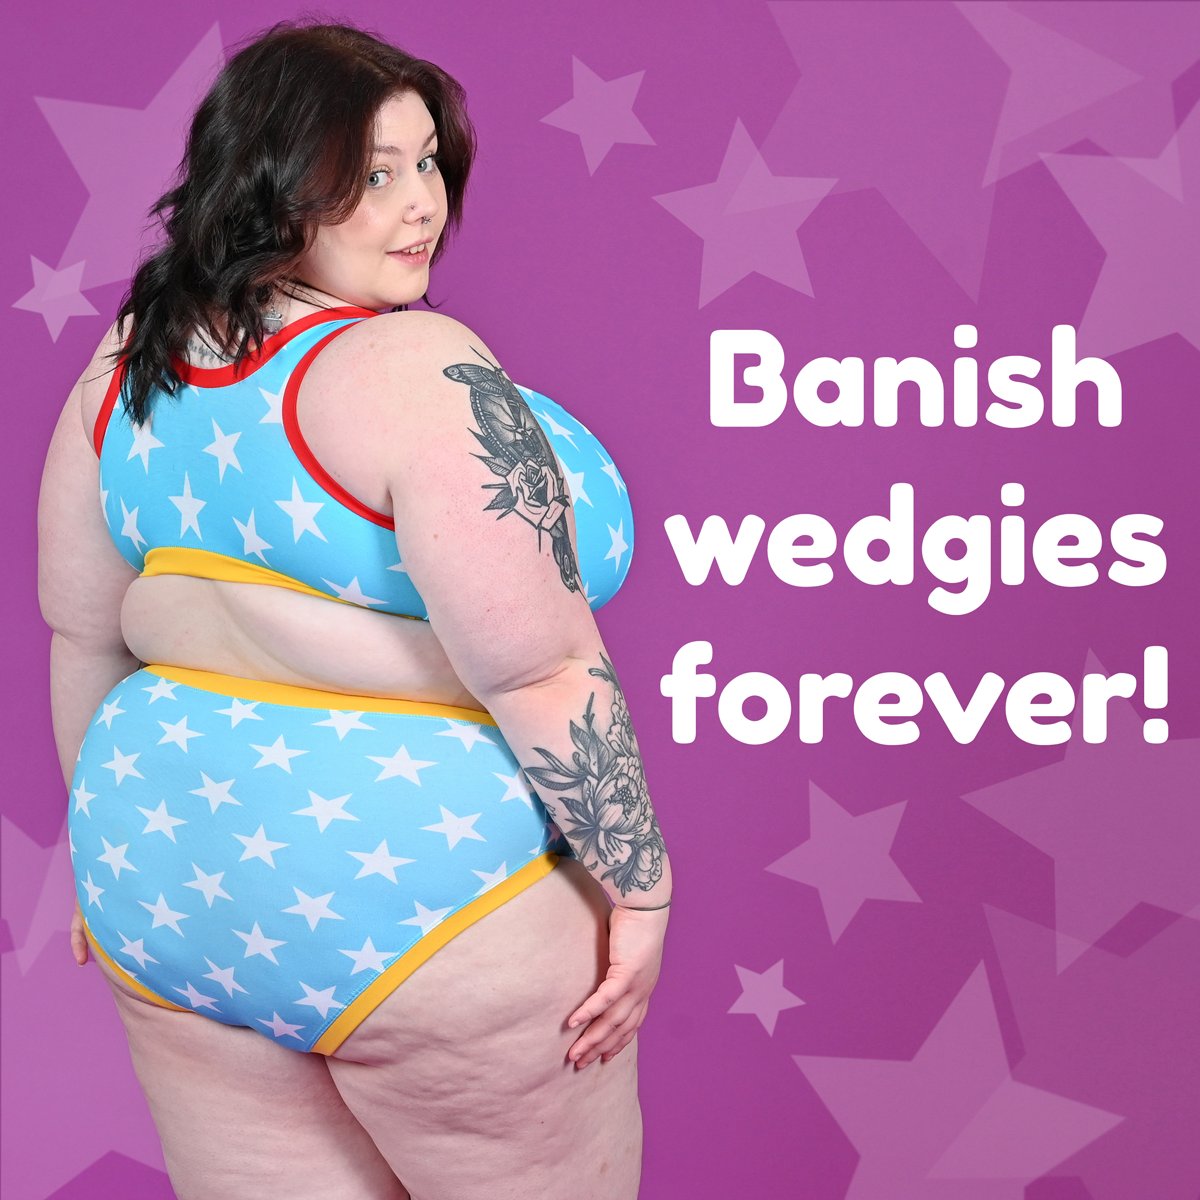 Molke on X: Banish wedgies forever with our brilliant briefs! Available in  3 comfy styles so you can take your pick from low, mid or high rise briefs.  Give your bum a